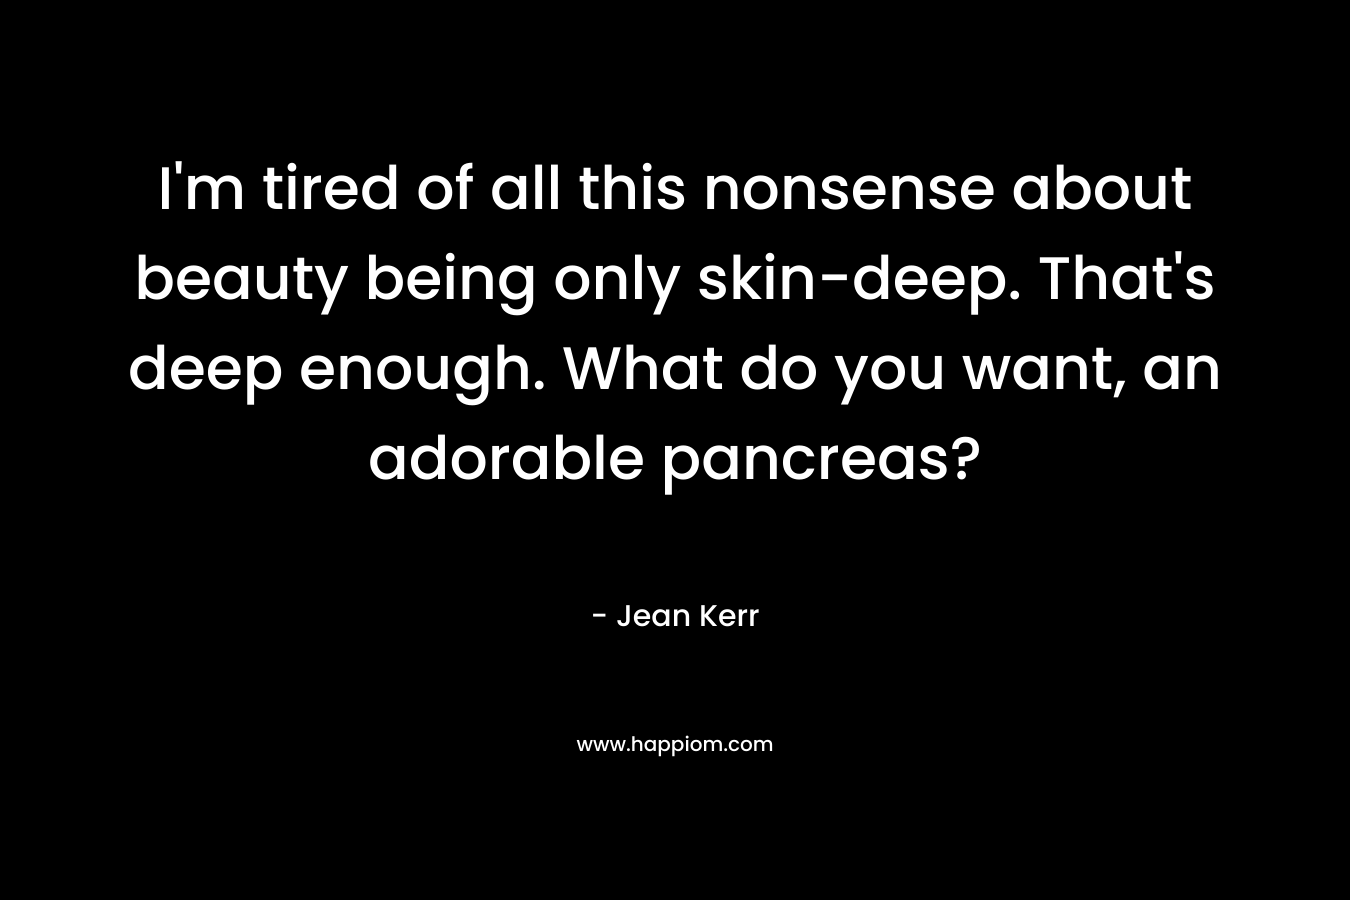 I'm tired of all this nonsense about beauty being only skin-deep. That's deep enough. What do you want, an adorable pancreas?